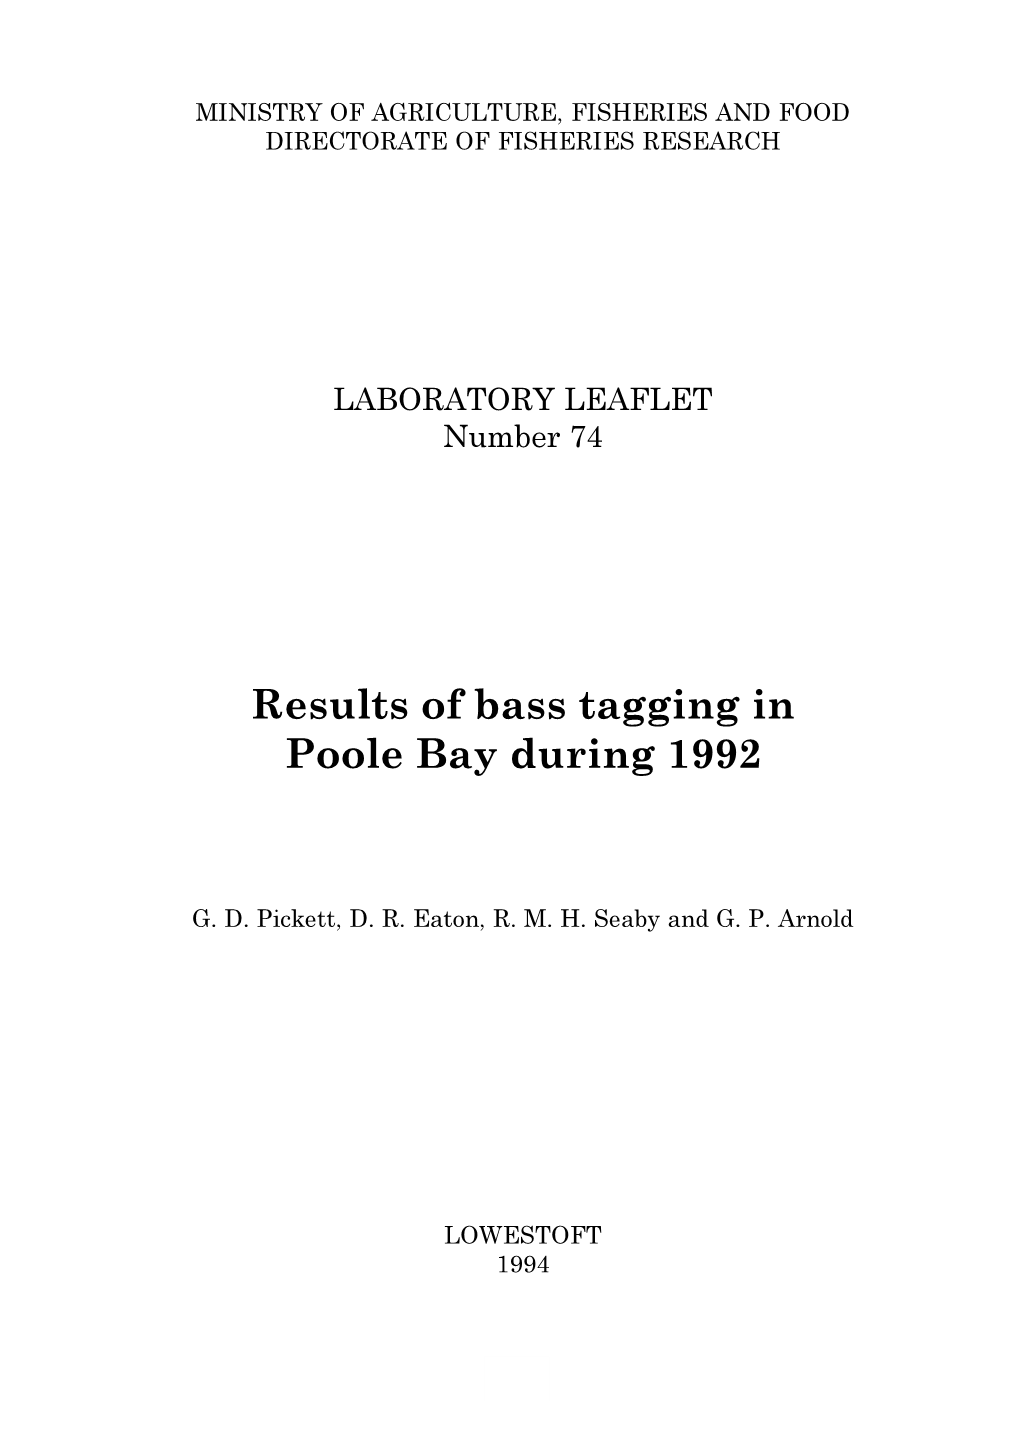 Results of Bass Tagging in Poole Bay During 1992